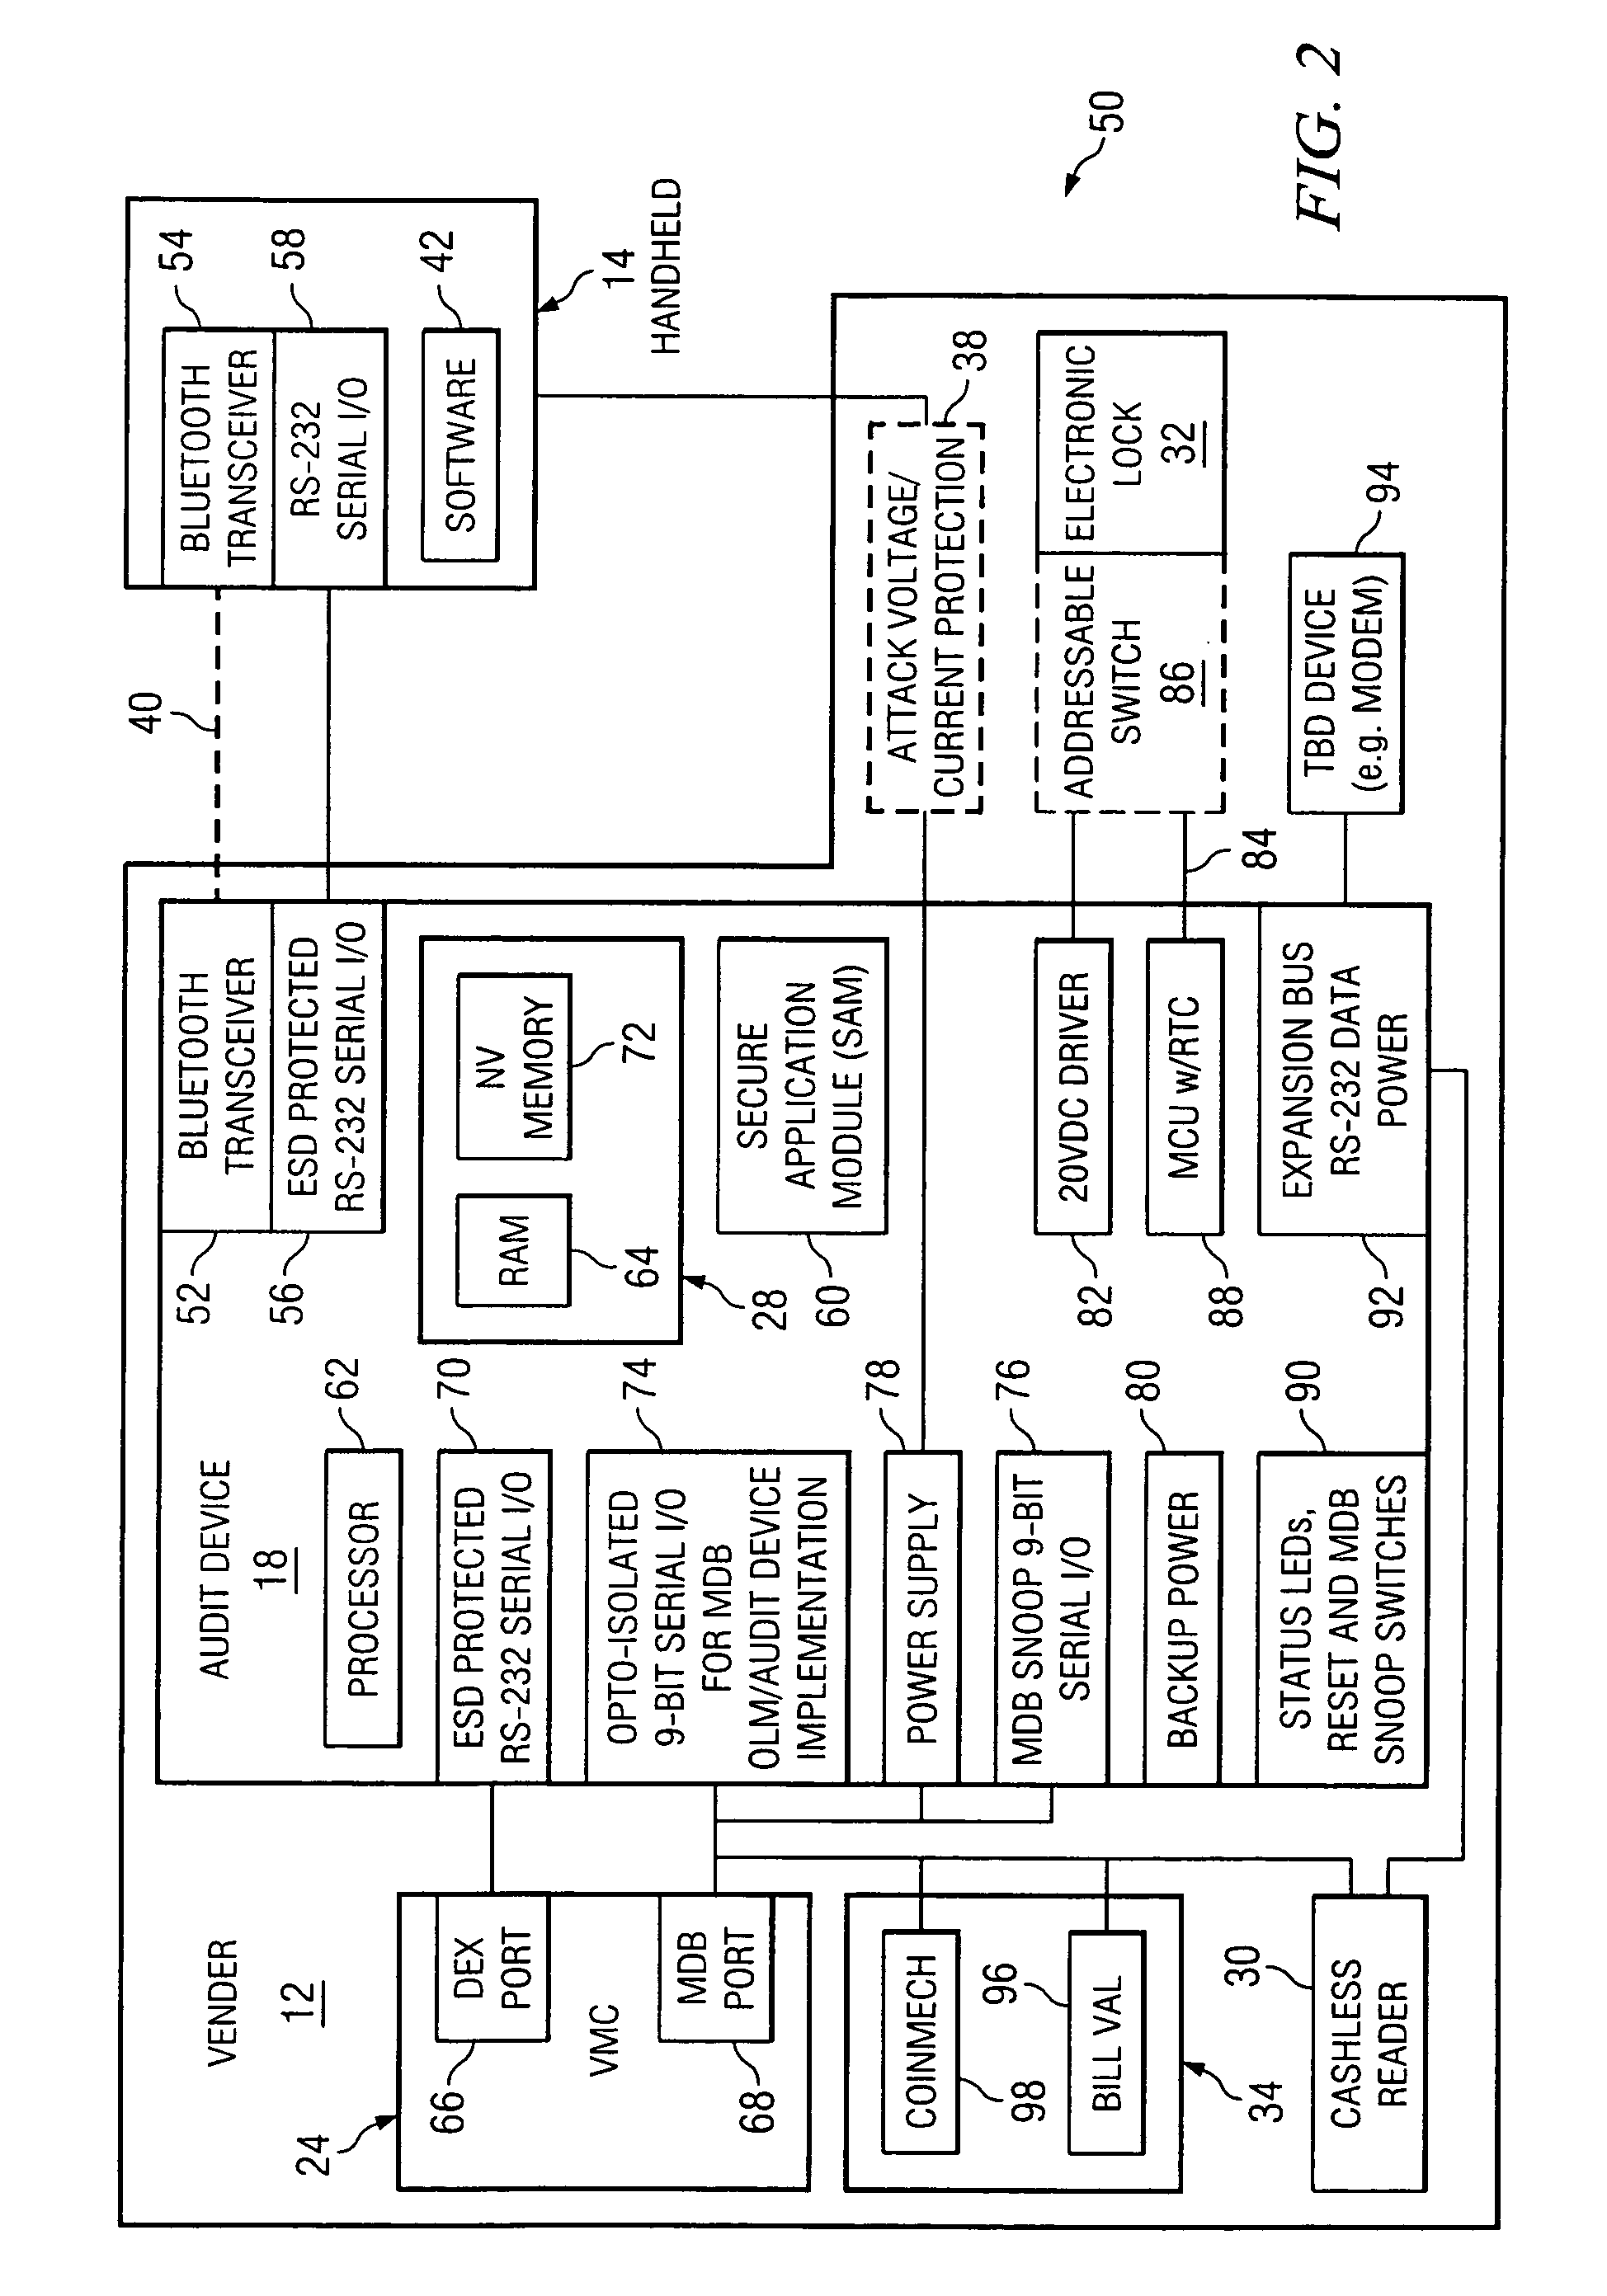 System, method and apparatus for vending machine wireless audit and cashless transaction transport